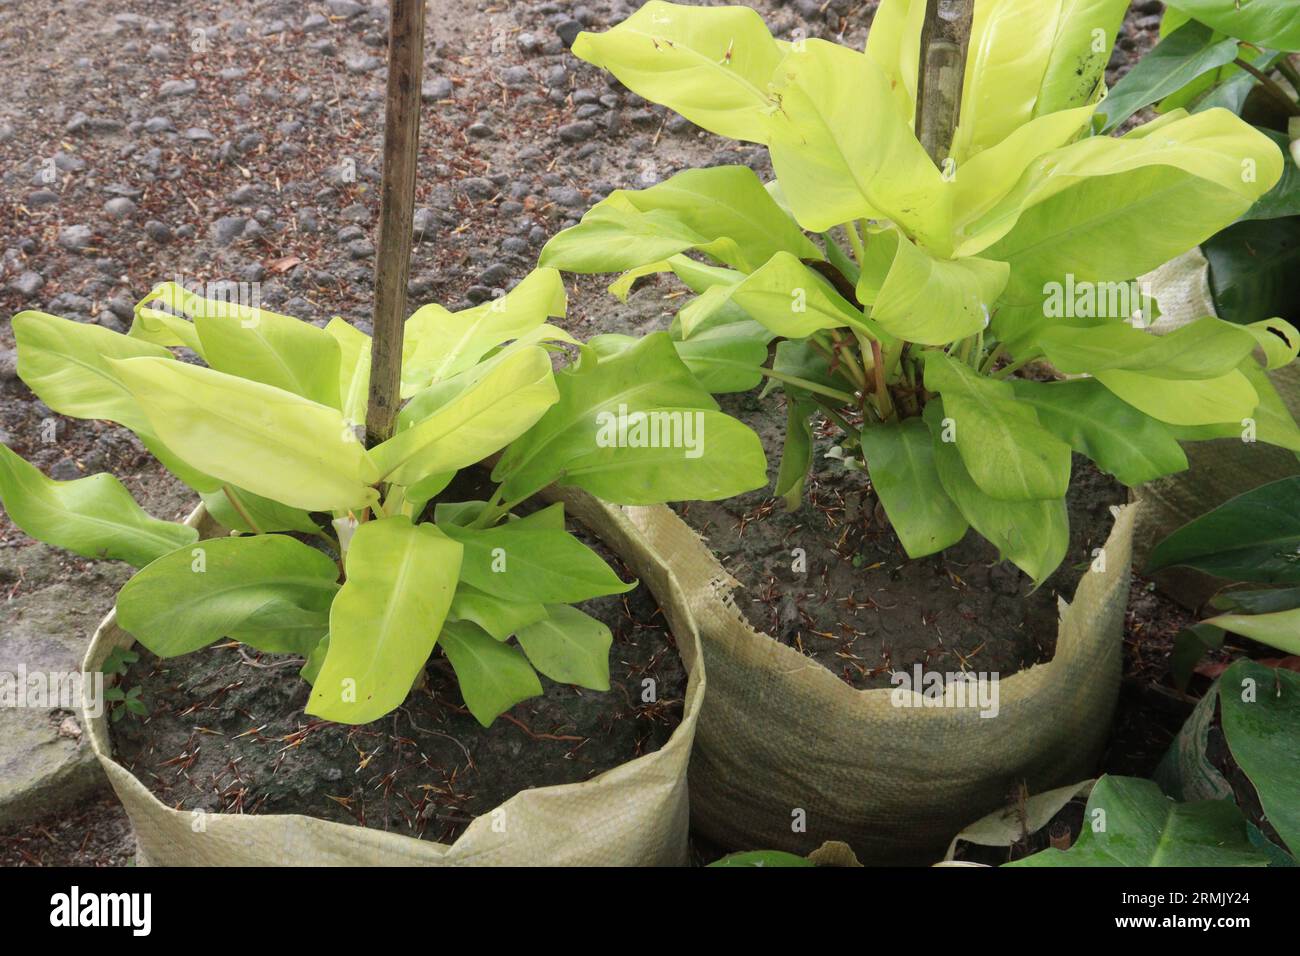 Philodendron Malay Gold leaf plant on farm for sell are cash crops Stock Photo